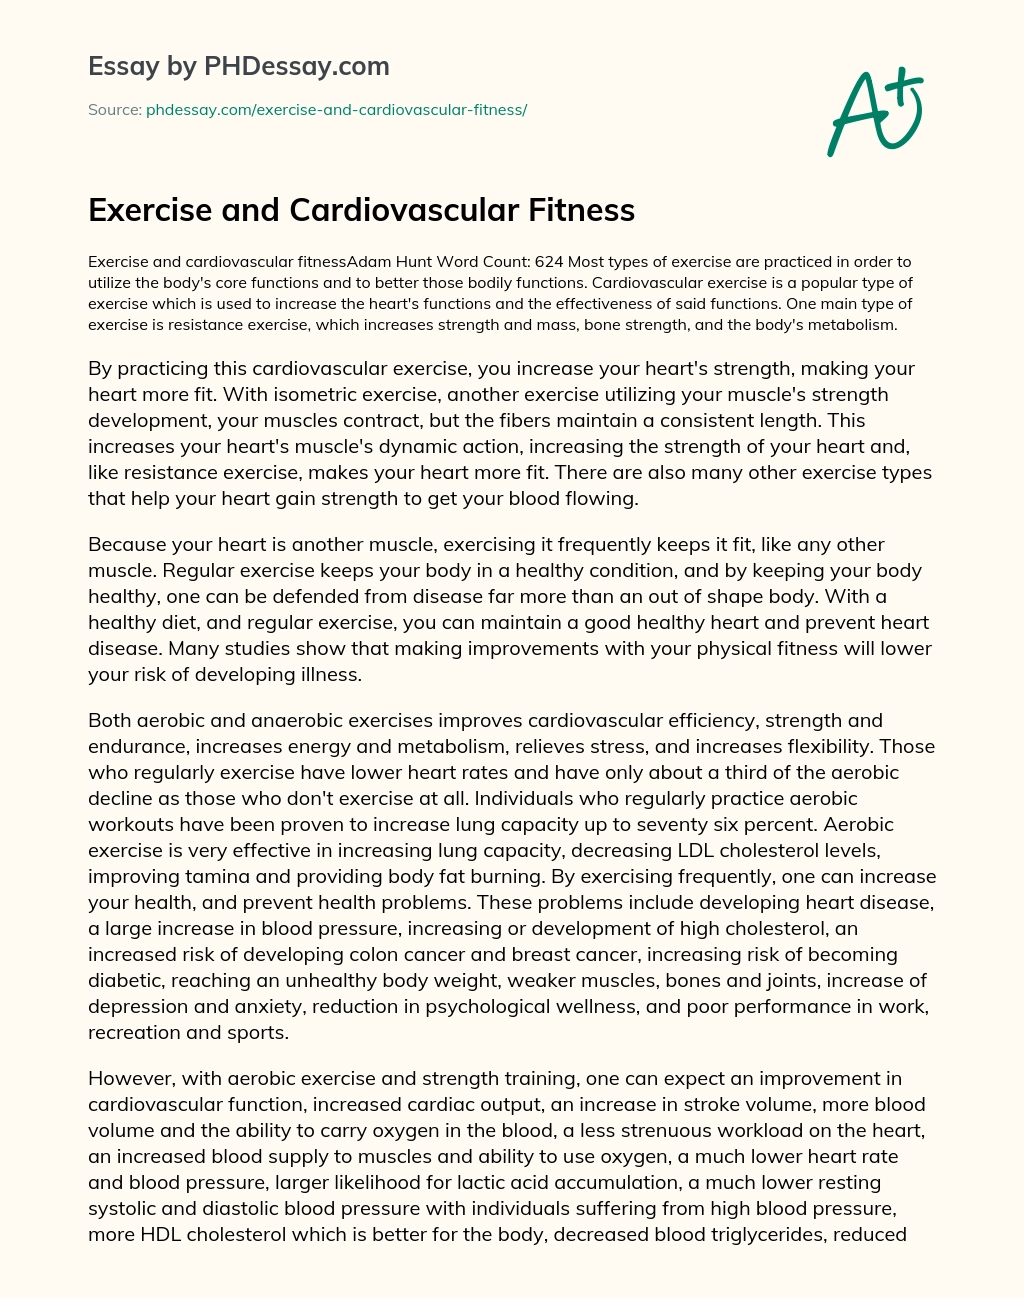 Exercise and Cardiovascular Fitness essay